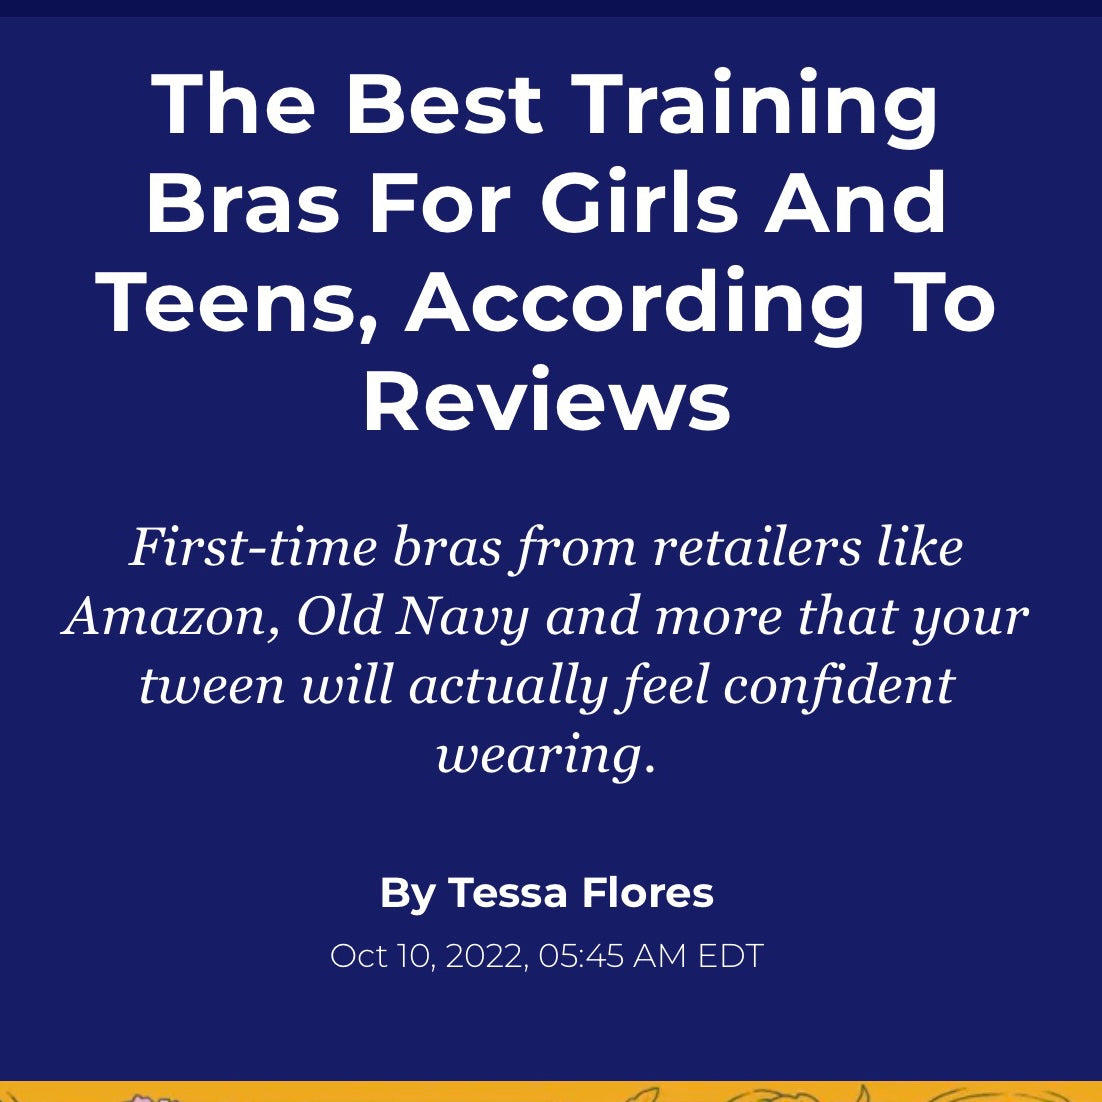 Bleuet Best Training Bras For Girls According to Reviews